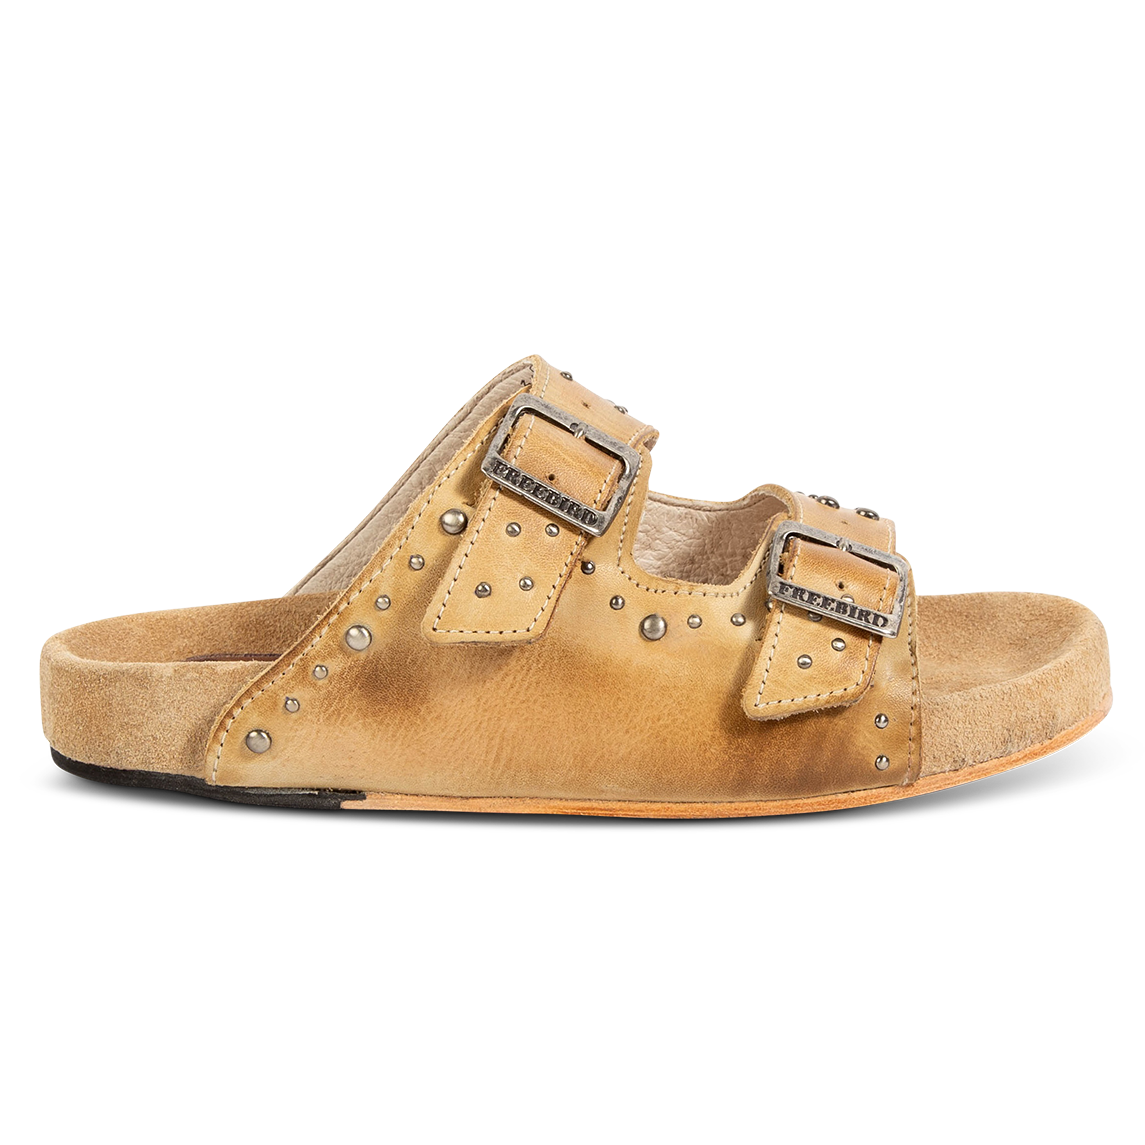 FREEBIRD women's Asher natural sandal with adjustable belt buckles, a suede footbed and silver embellishments